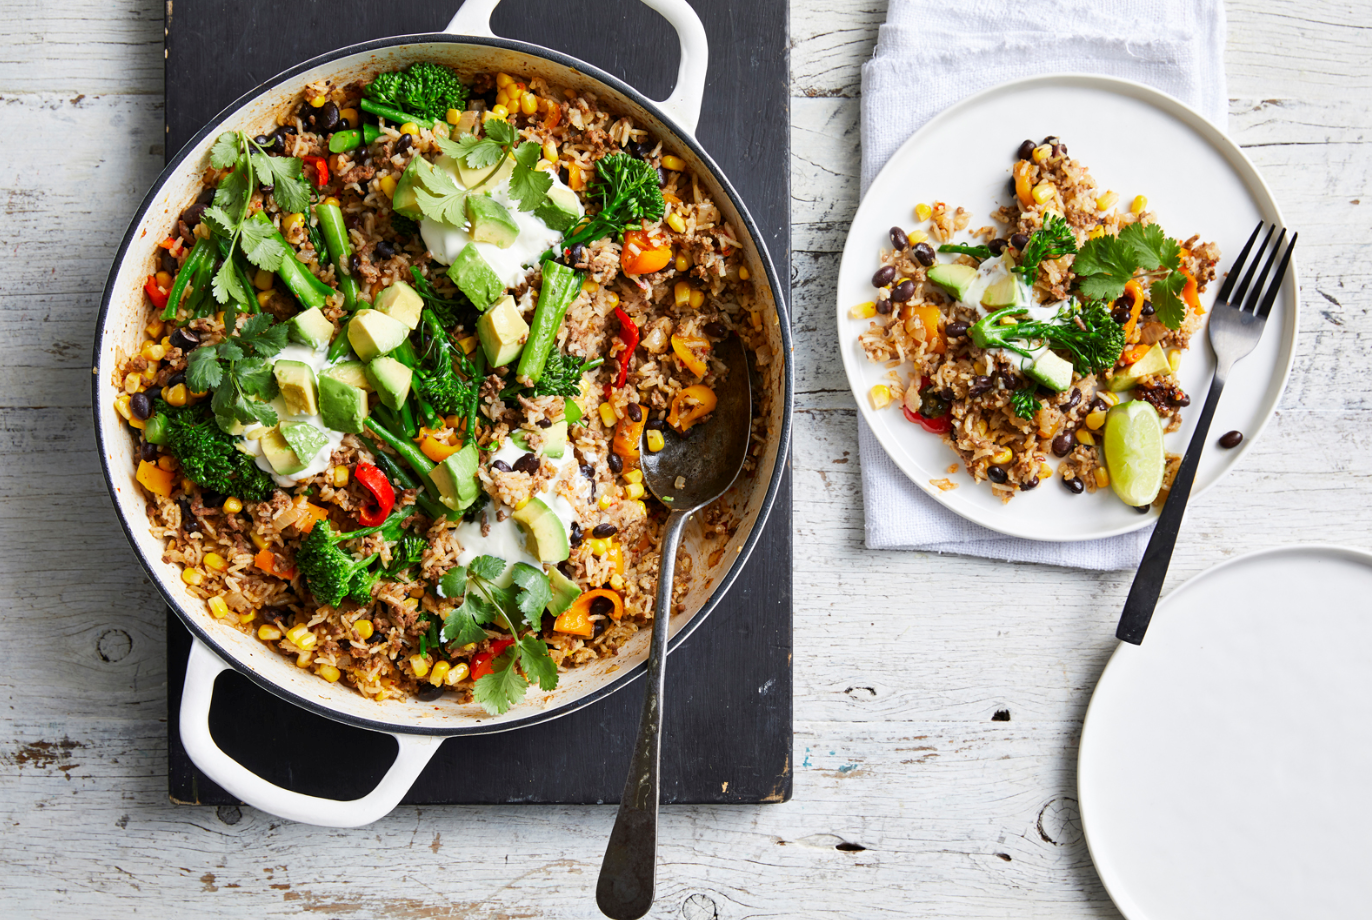 Recipe - One pan mexican style beef and broccolini rice